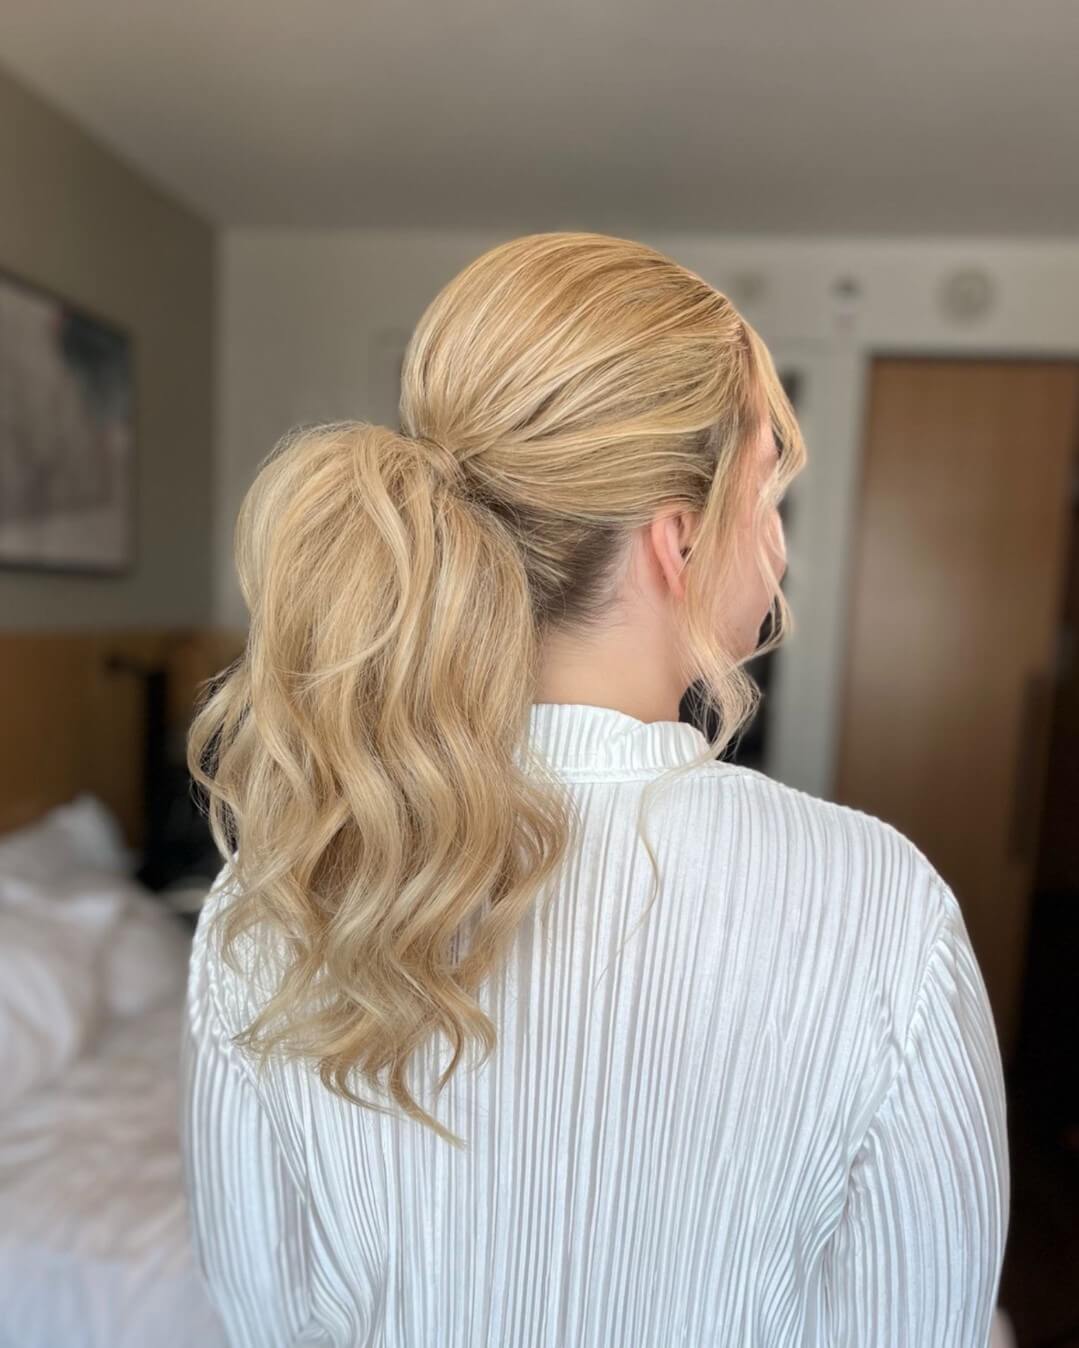 Ponytail with strands twirled at the base in blonde for a secure softball look